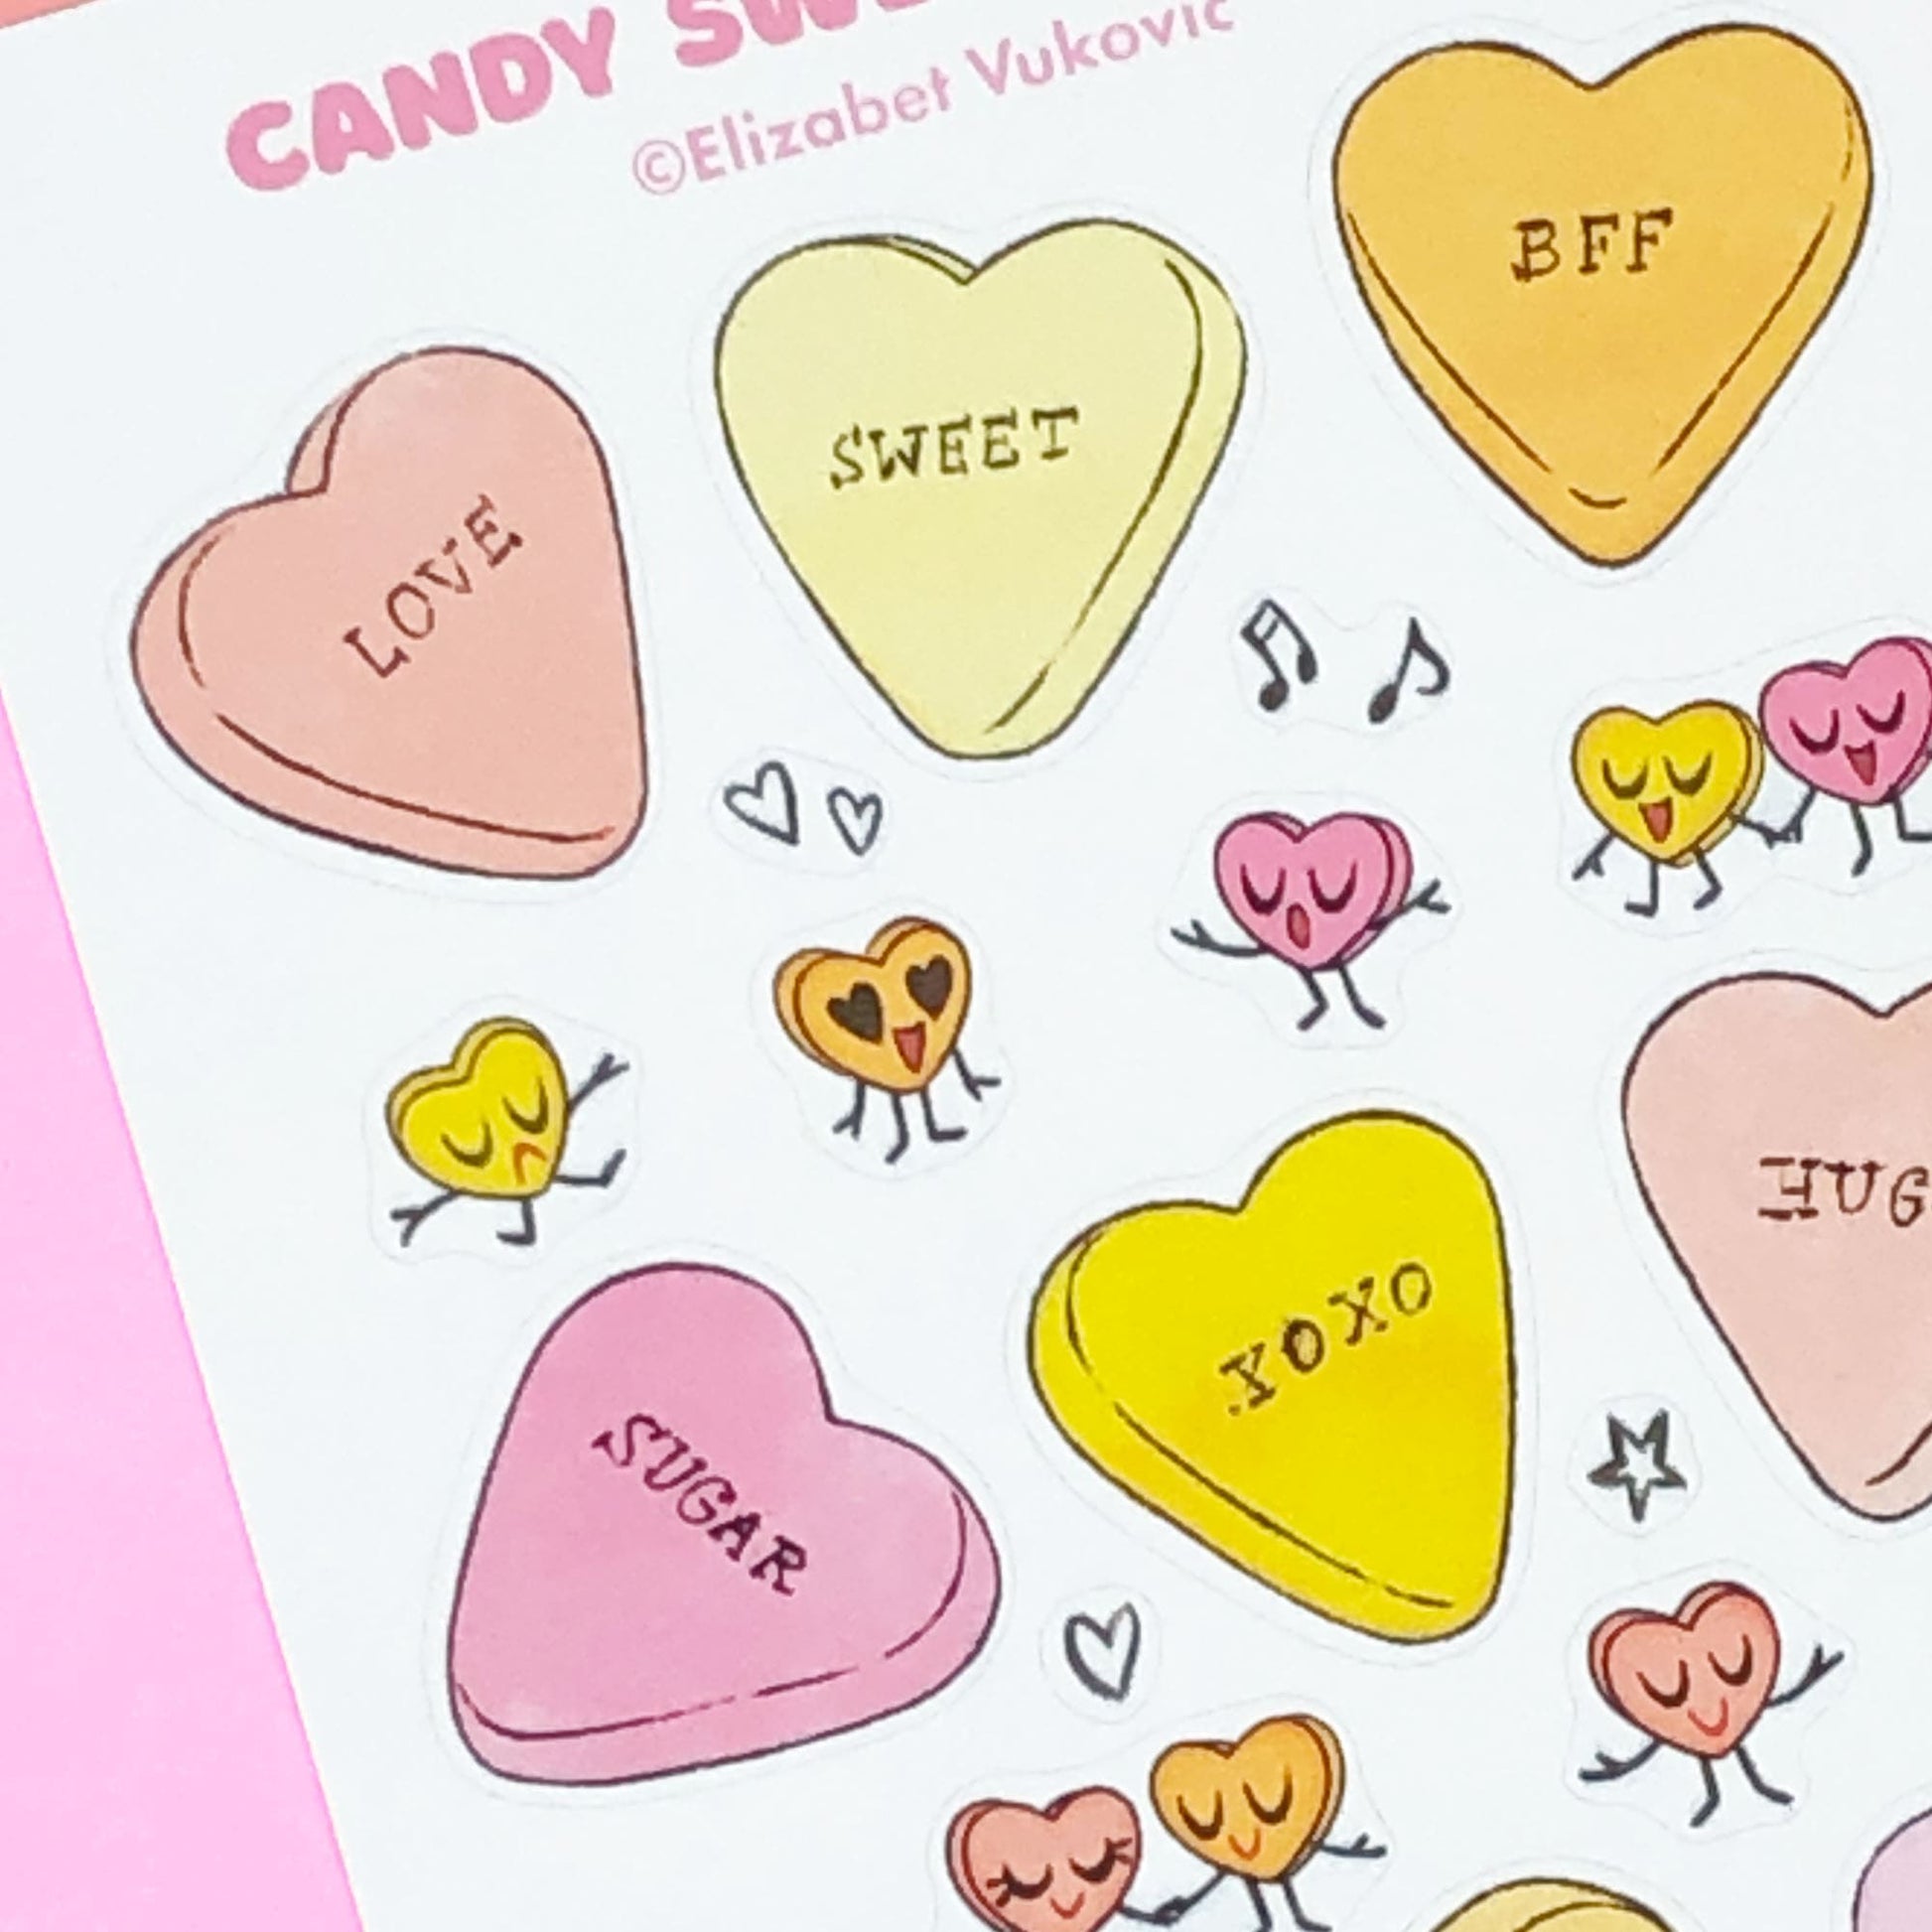 Whimsical candy conversation hearts stickers.